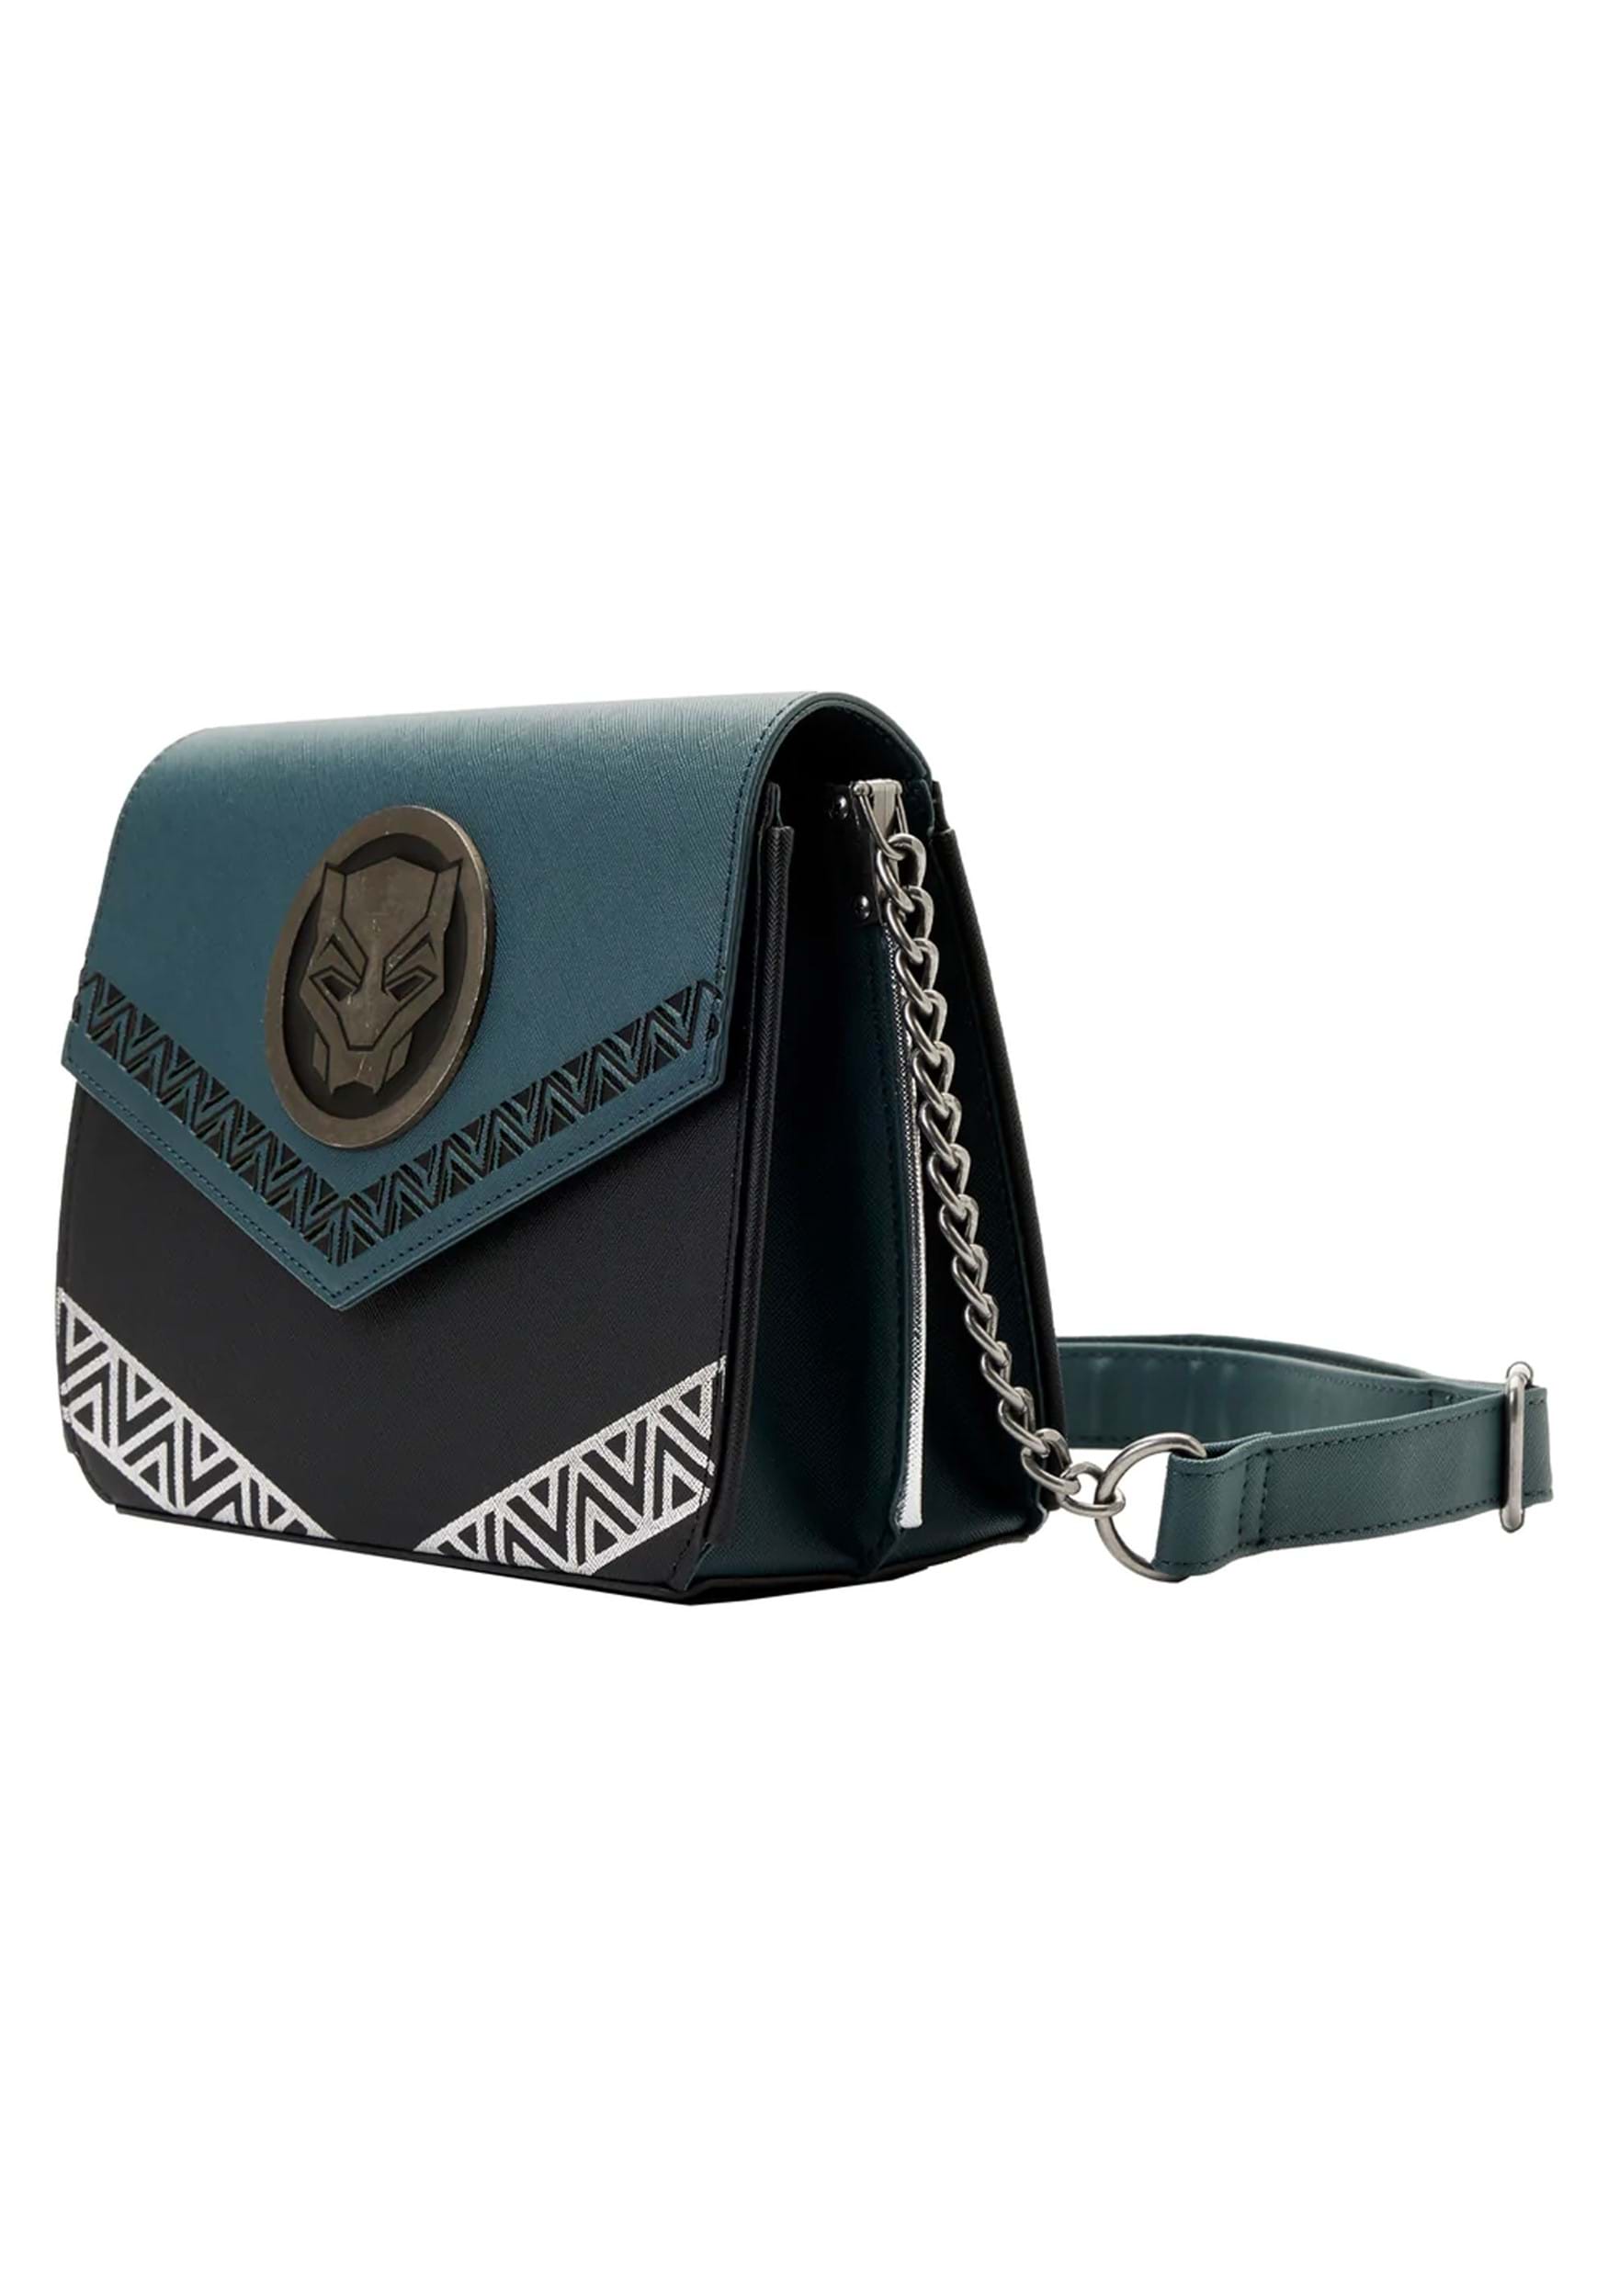 Loungefly Black Panther Wakanda Forever Crossbody Bag For Women